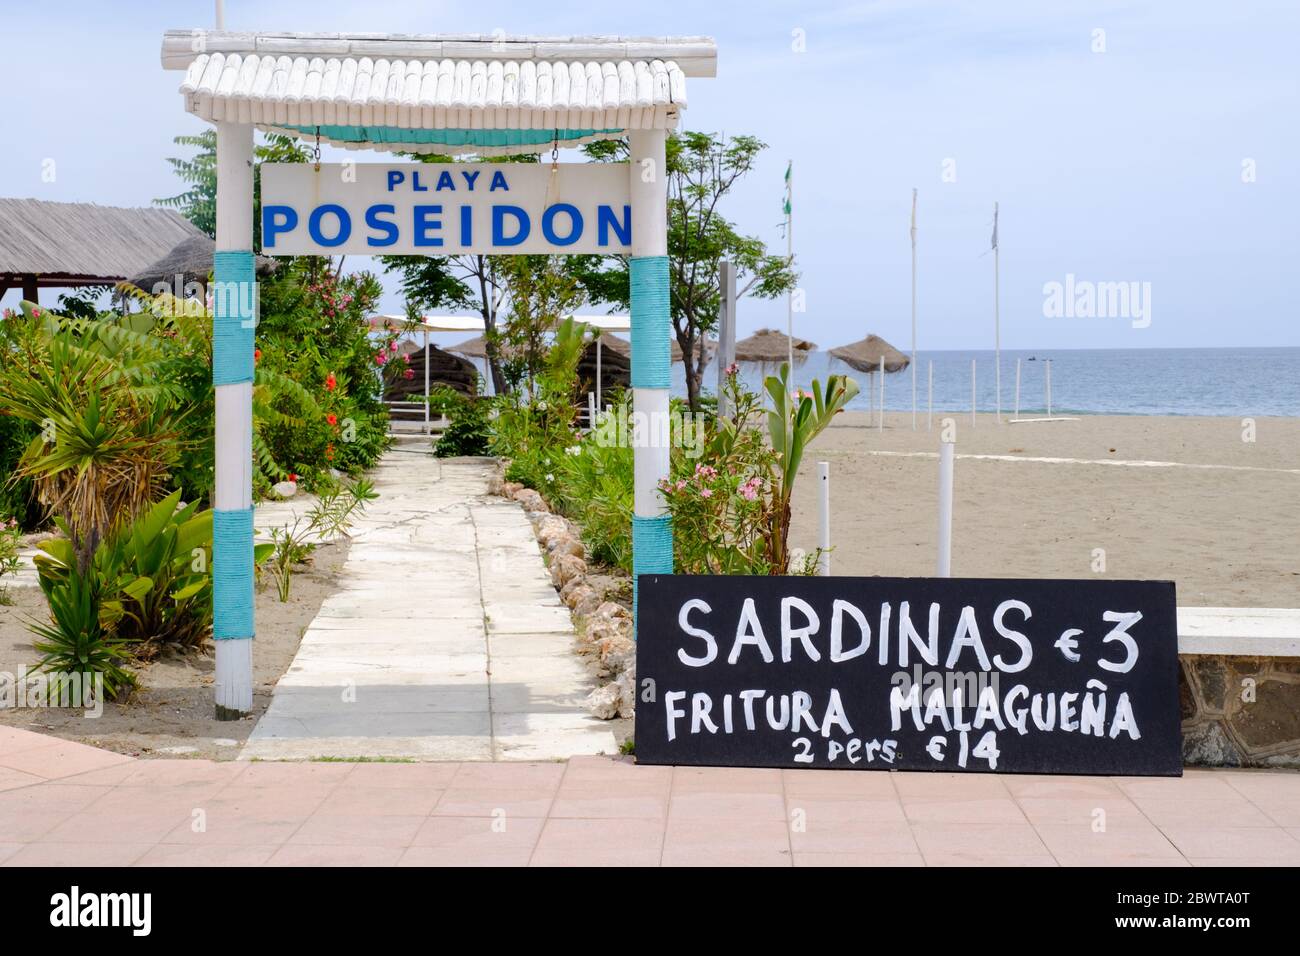 Phase 2 of the Covid-19 in Spain. Easing of restrictions on the beach at Torremolinos, Malaga, Andalucia, Costa del Sol, Spain, Europe Stock Photo